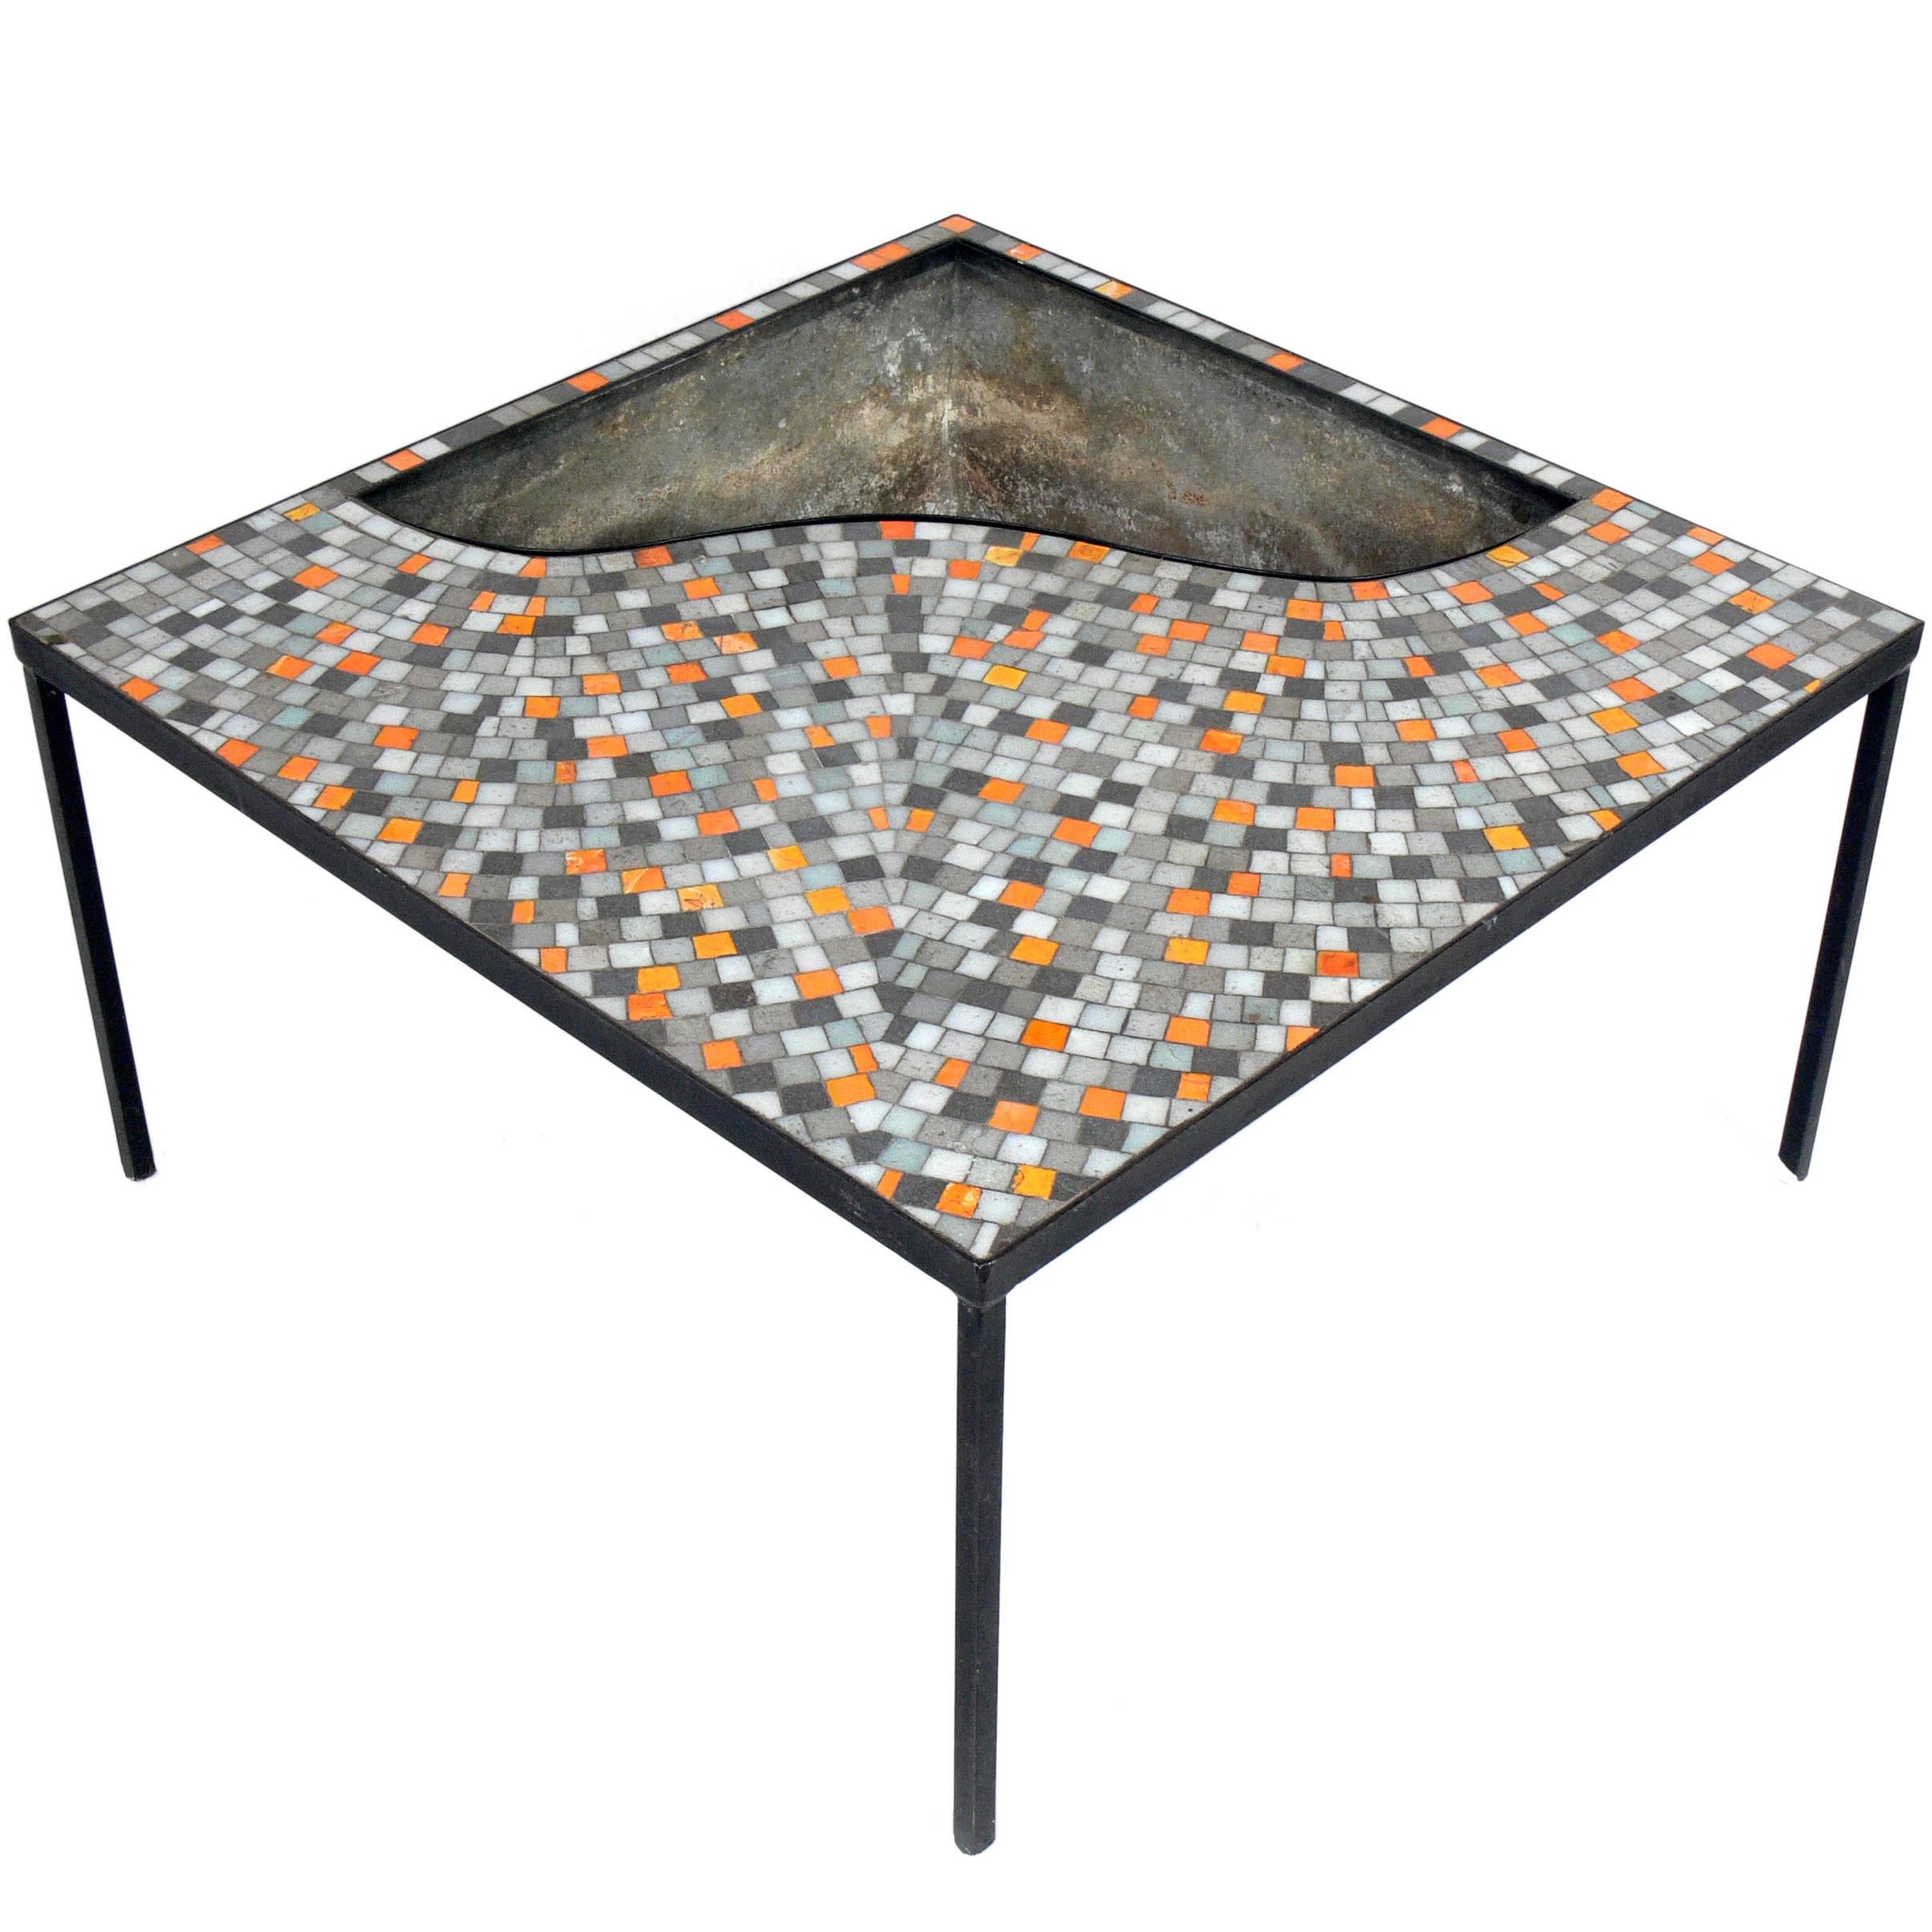 Mosaic Tile Coffee Table with Inset Planter or Drink Cooler